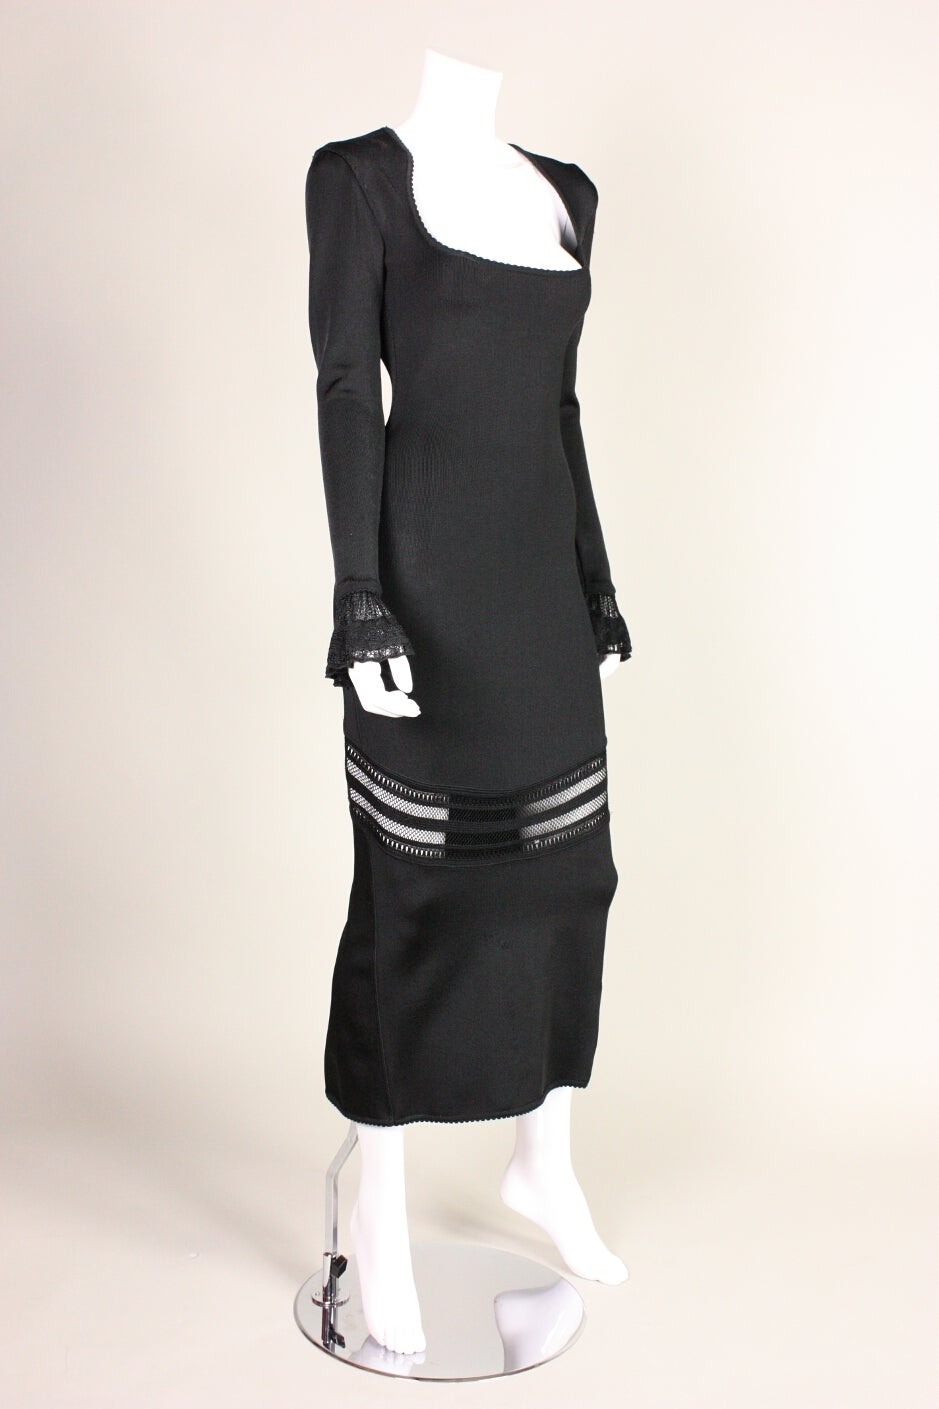 Jet black long dress with open lace knit panel from Azzedine Alaia dates to the 1990's. It features a scoop neck with picot trim and bell cuffs.  Unlined except for in the bust.  Made in Italy. Zips up center back with a hidden zipper.

Labeled